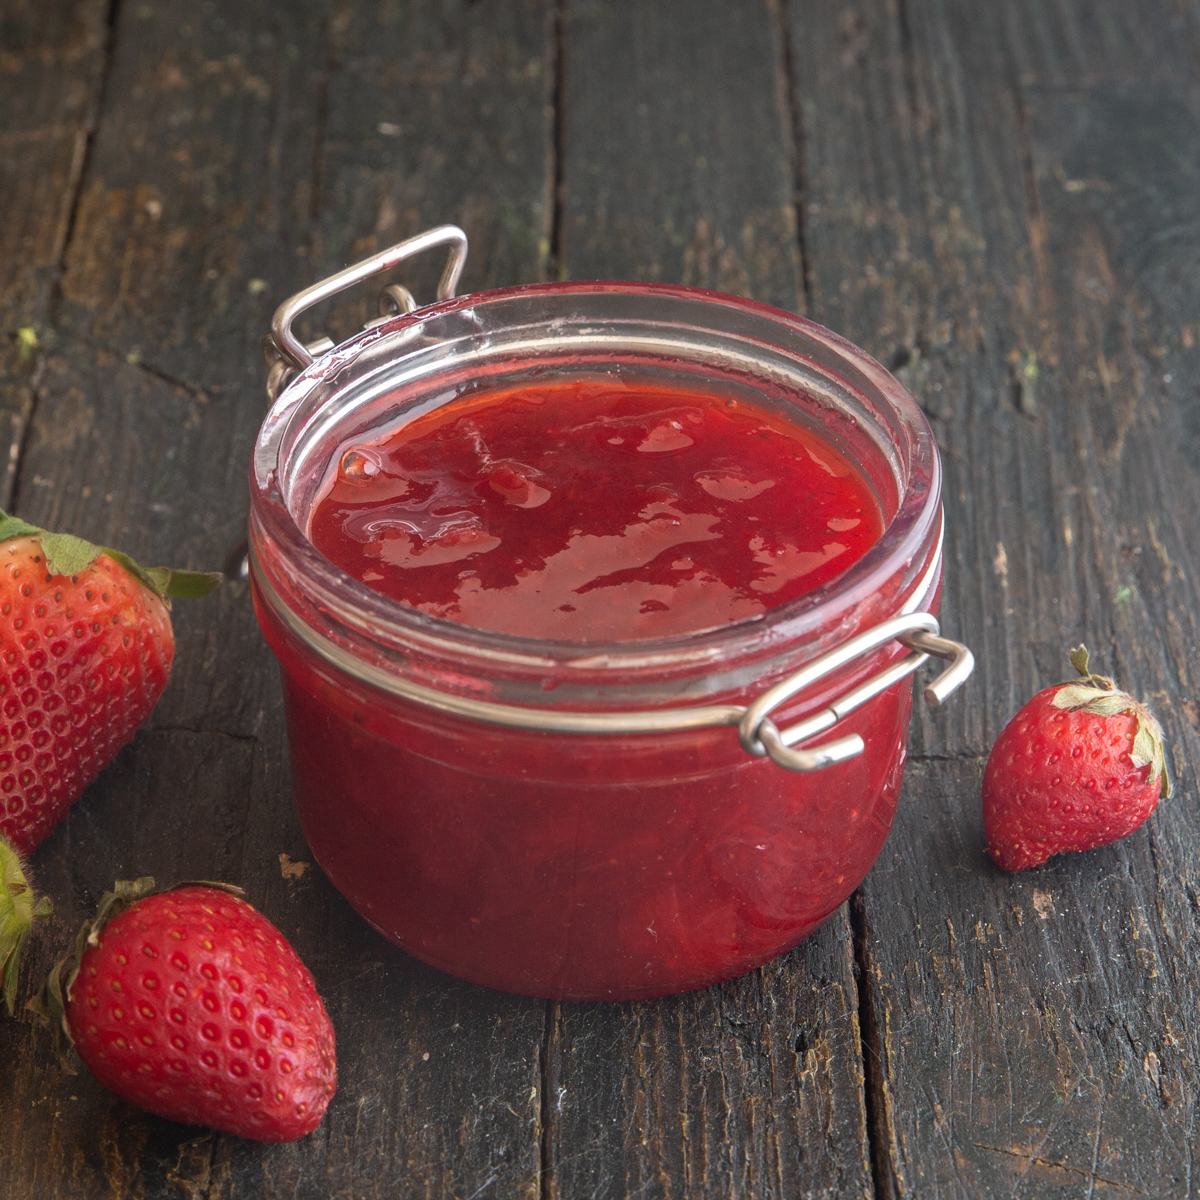 Jam in a jar with strawberries on the board around it.